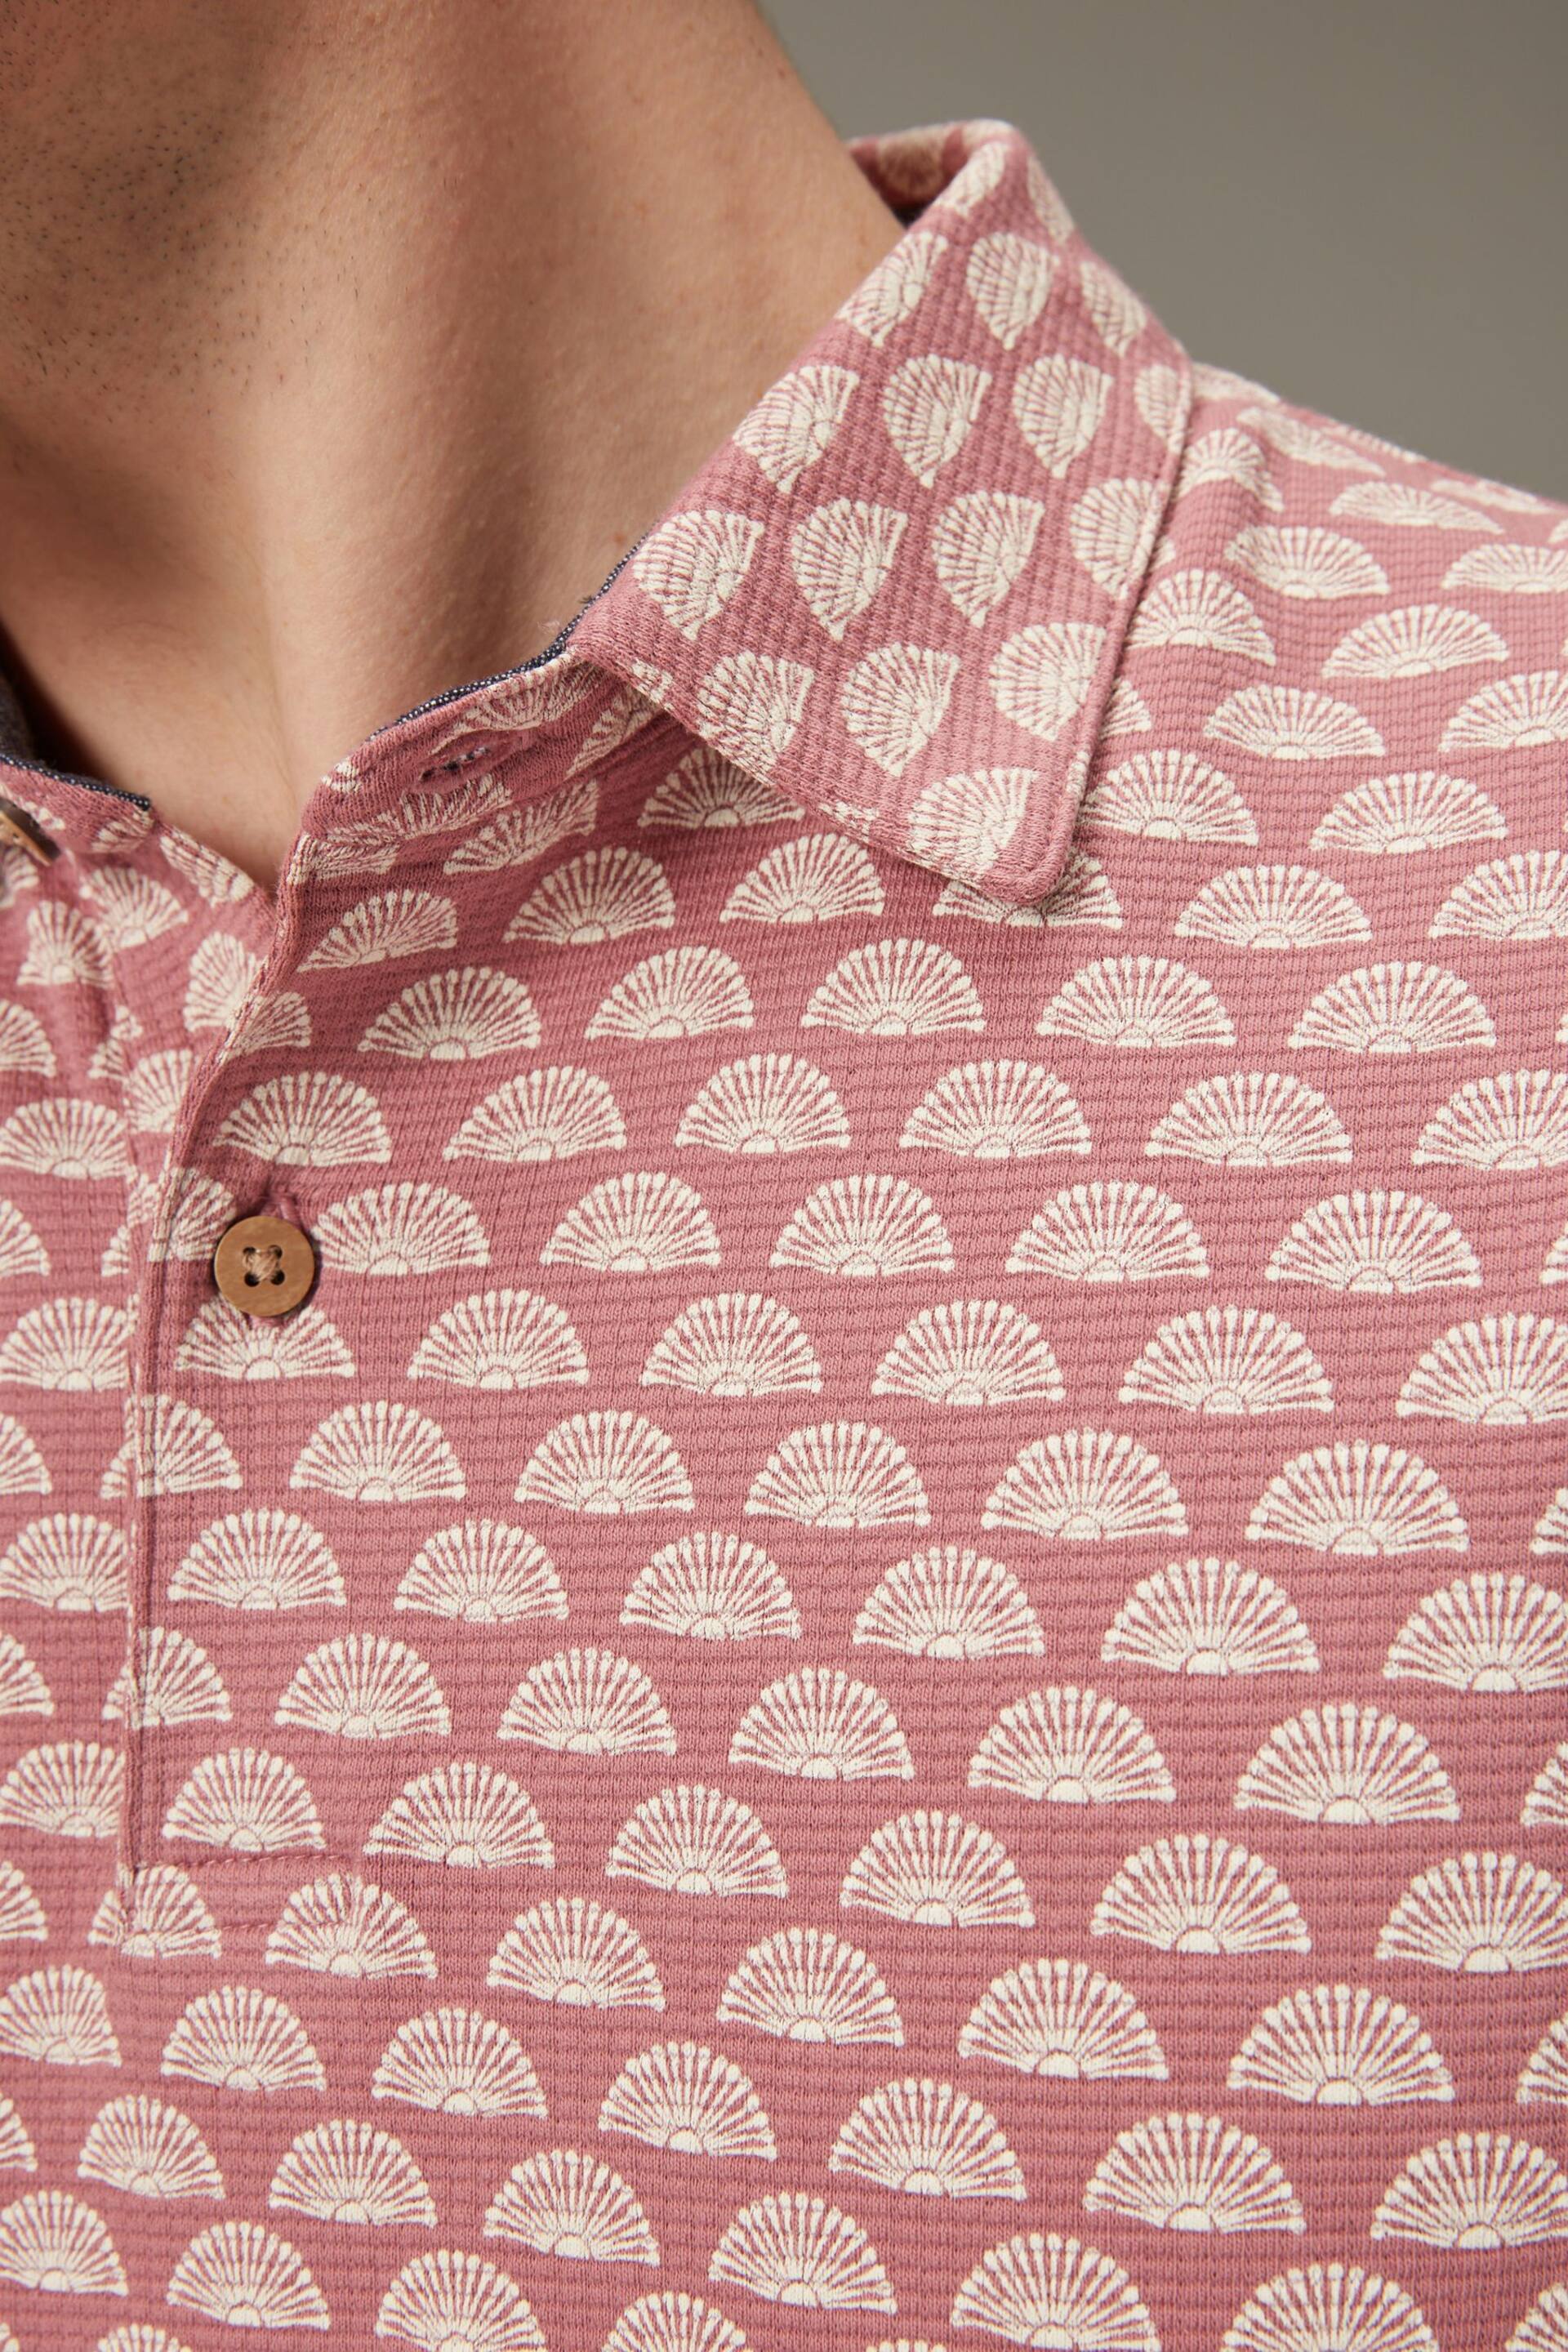 Pink/White Textured Print Polo Shirt - Image 6 of 10